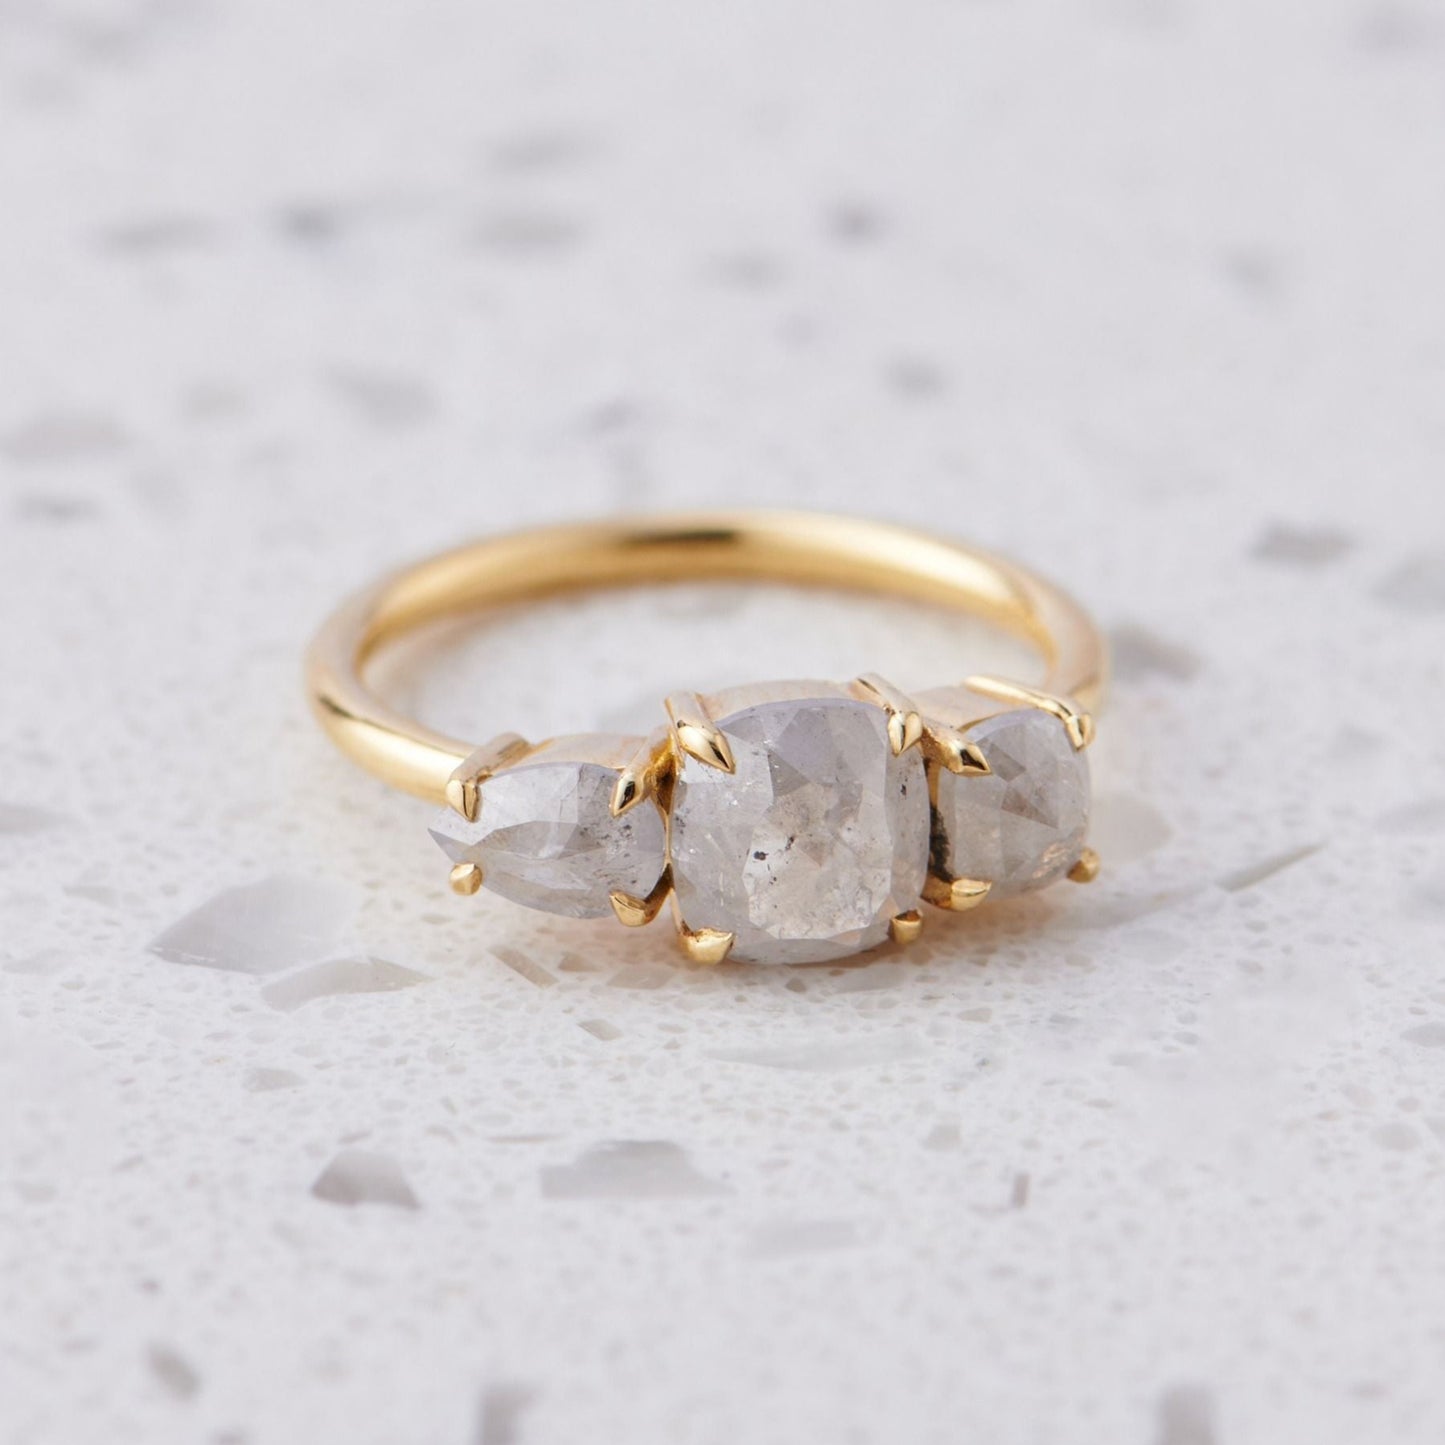 Check out this alternative raw diamond engagement ring I just made! : r/ EngagementRings